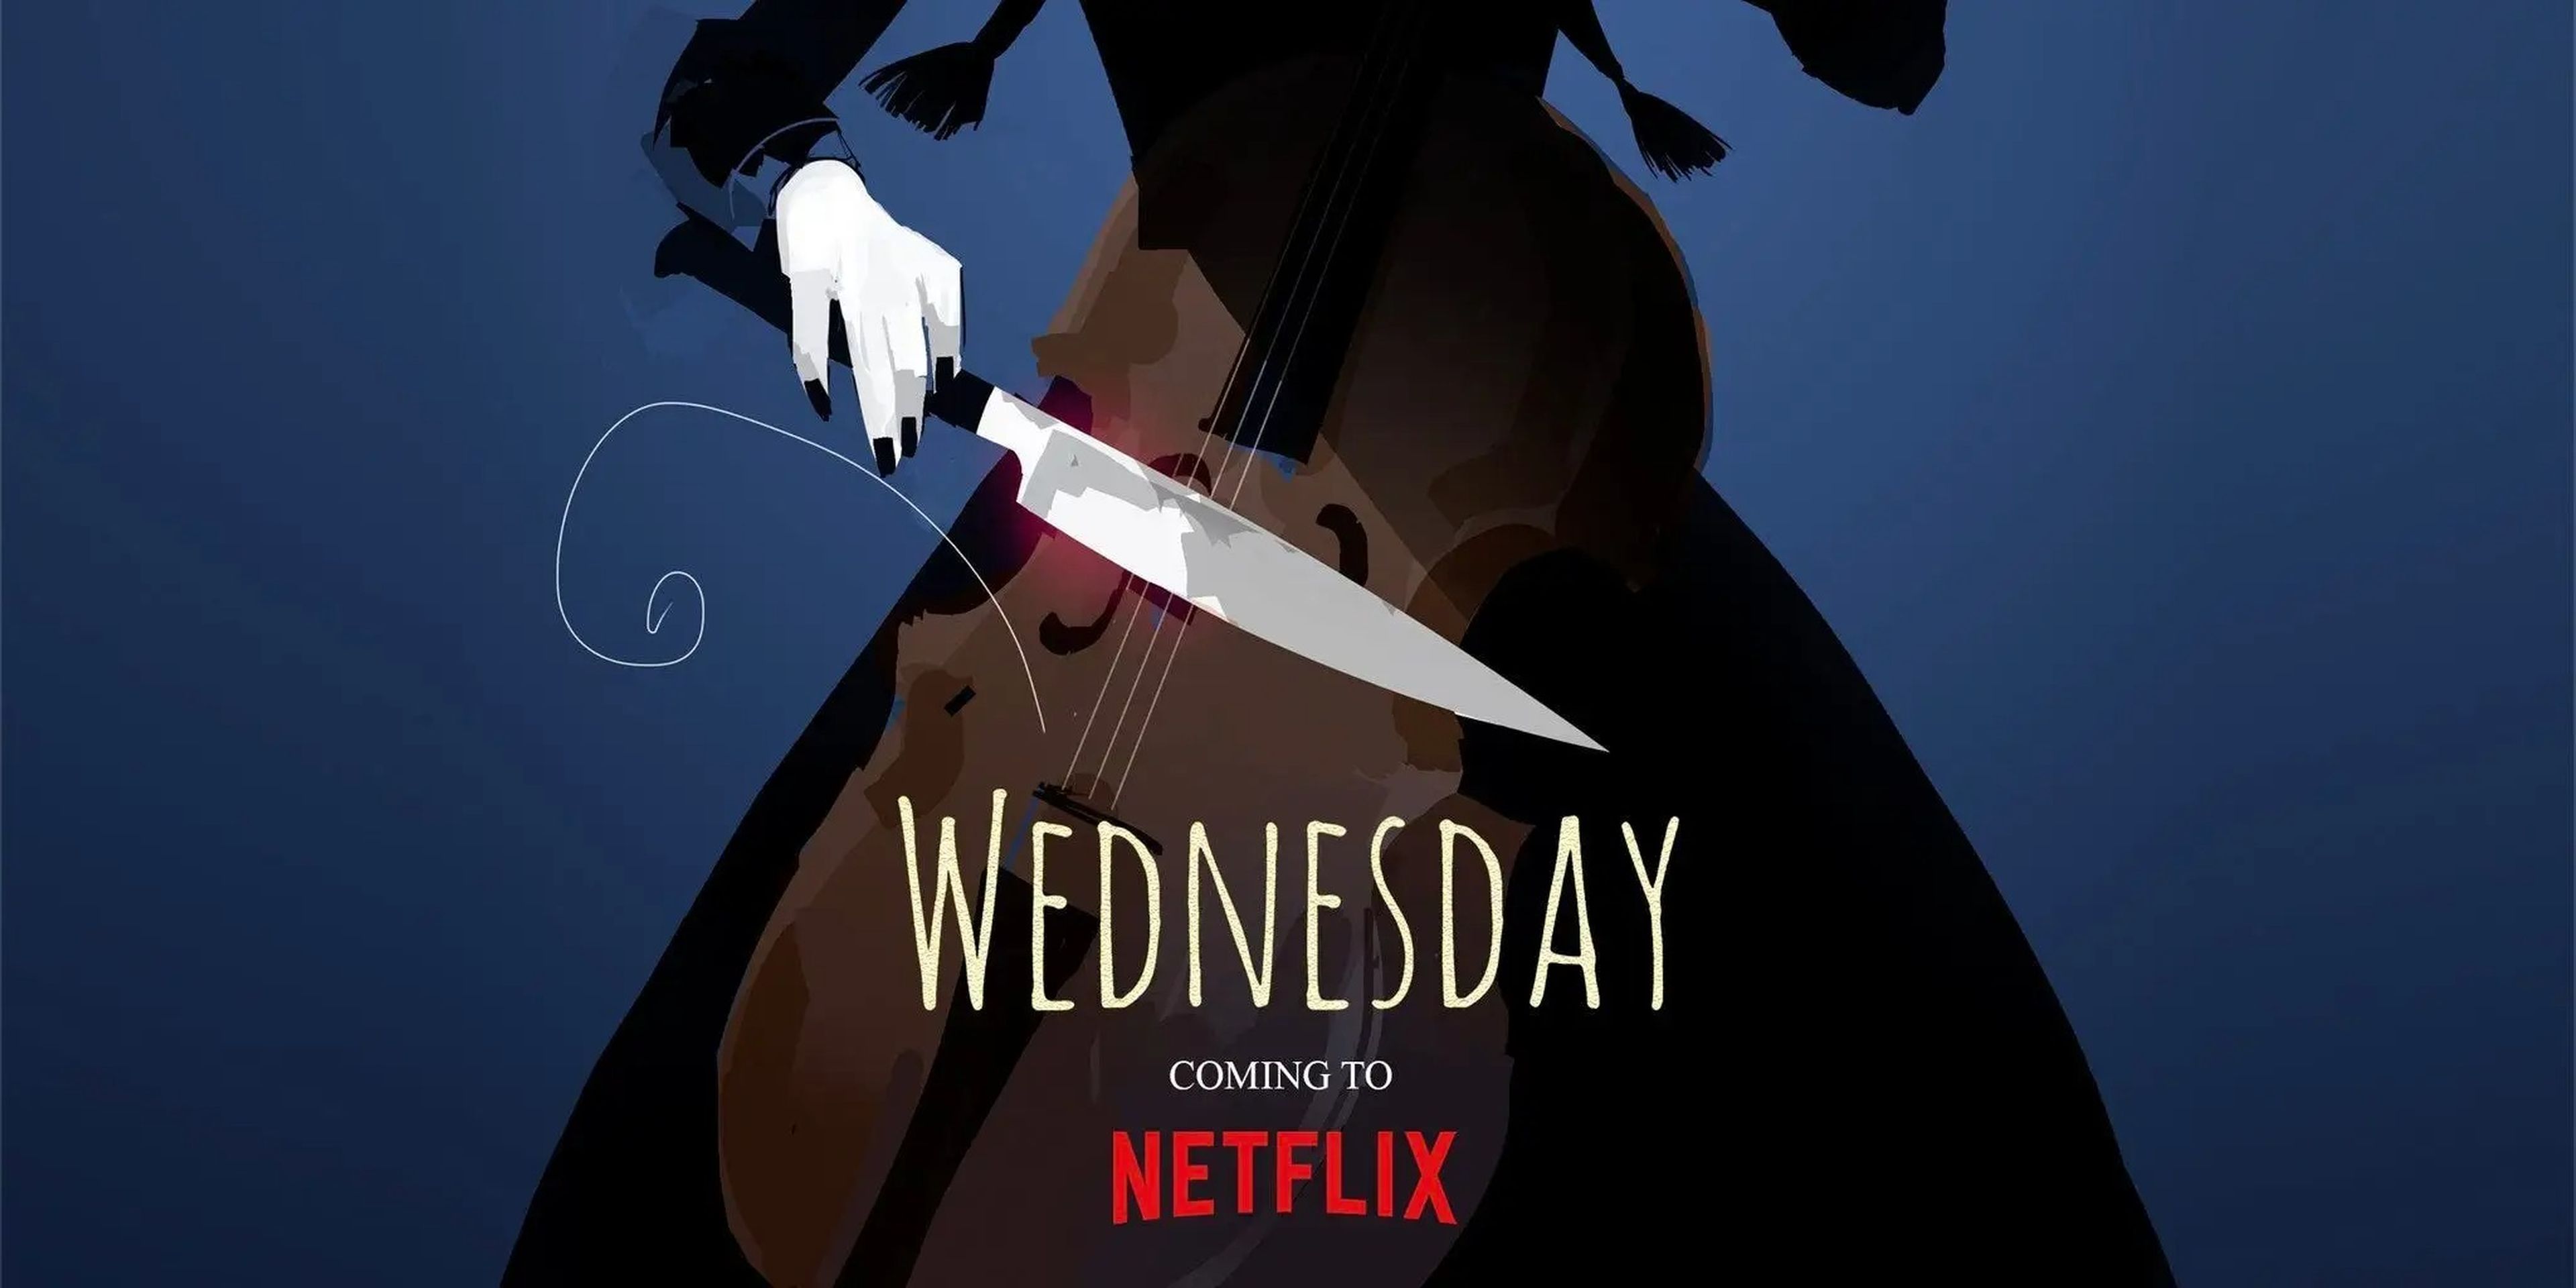 The key art for "Wednesday" — a poster showing the silhouette of a girl with pigtails playing a musical instrument.